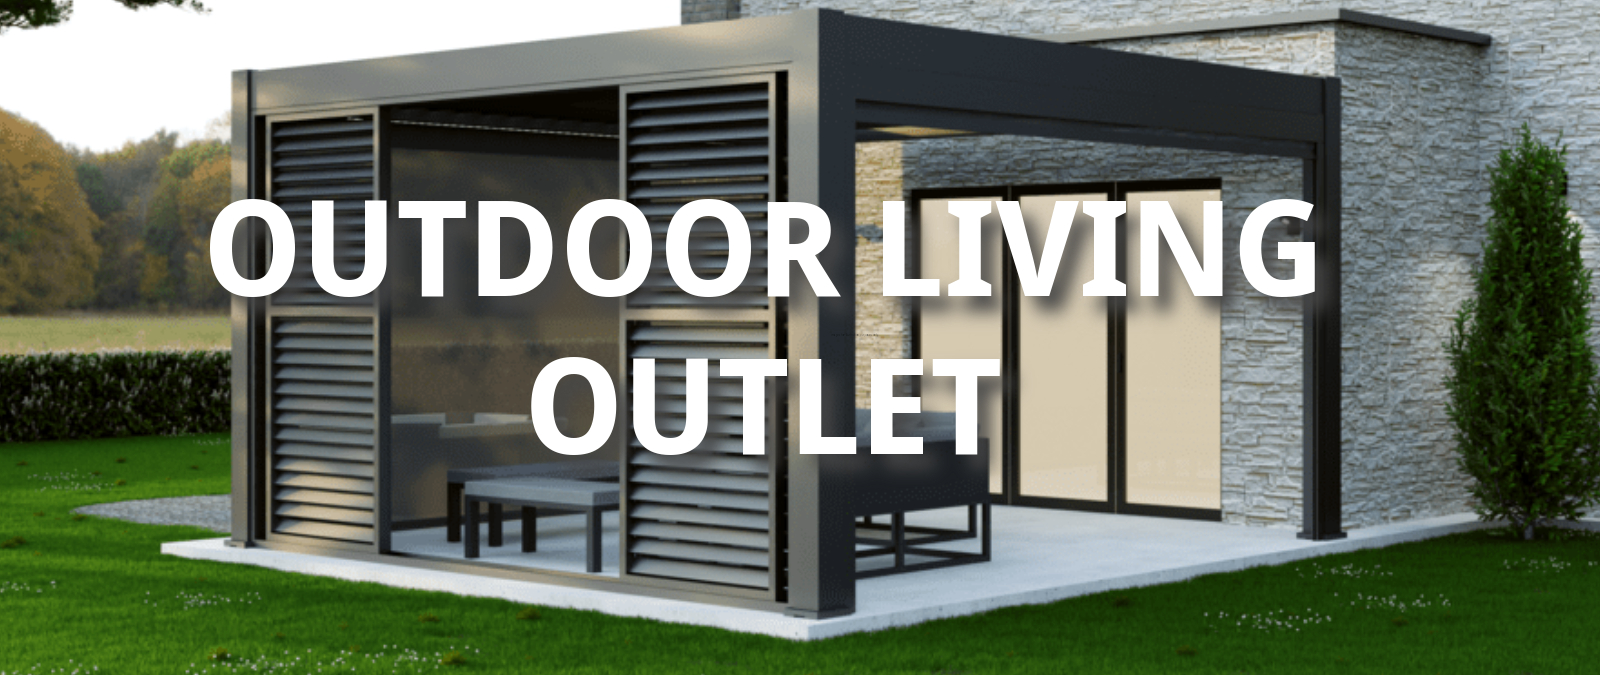 Outdoor Living Outlet Sale